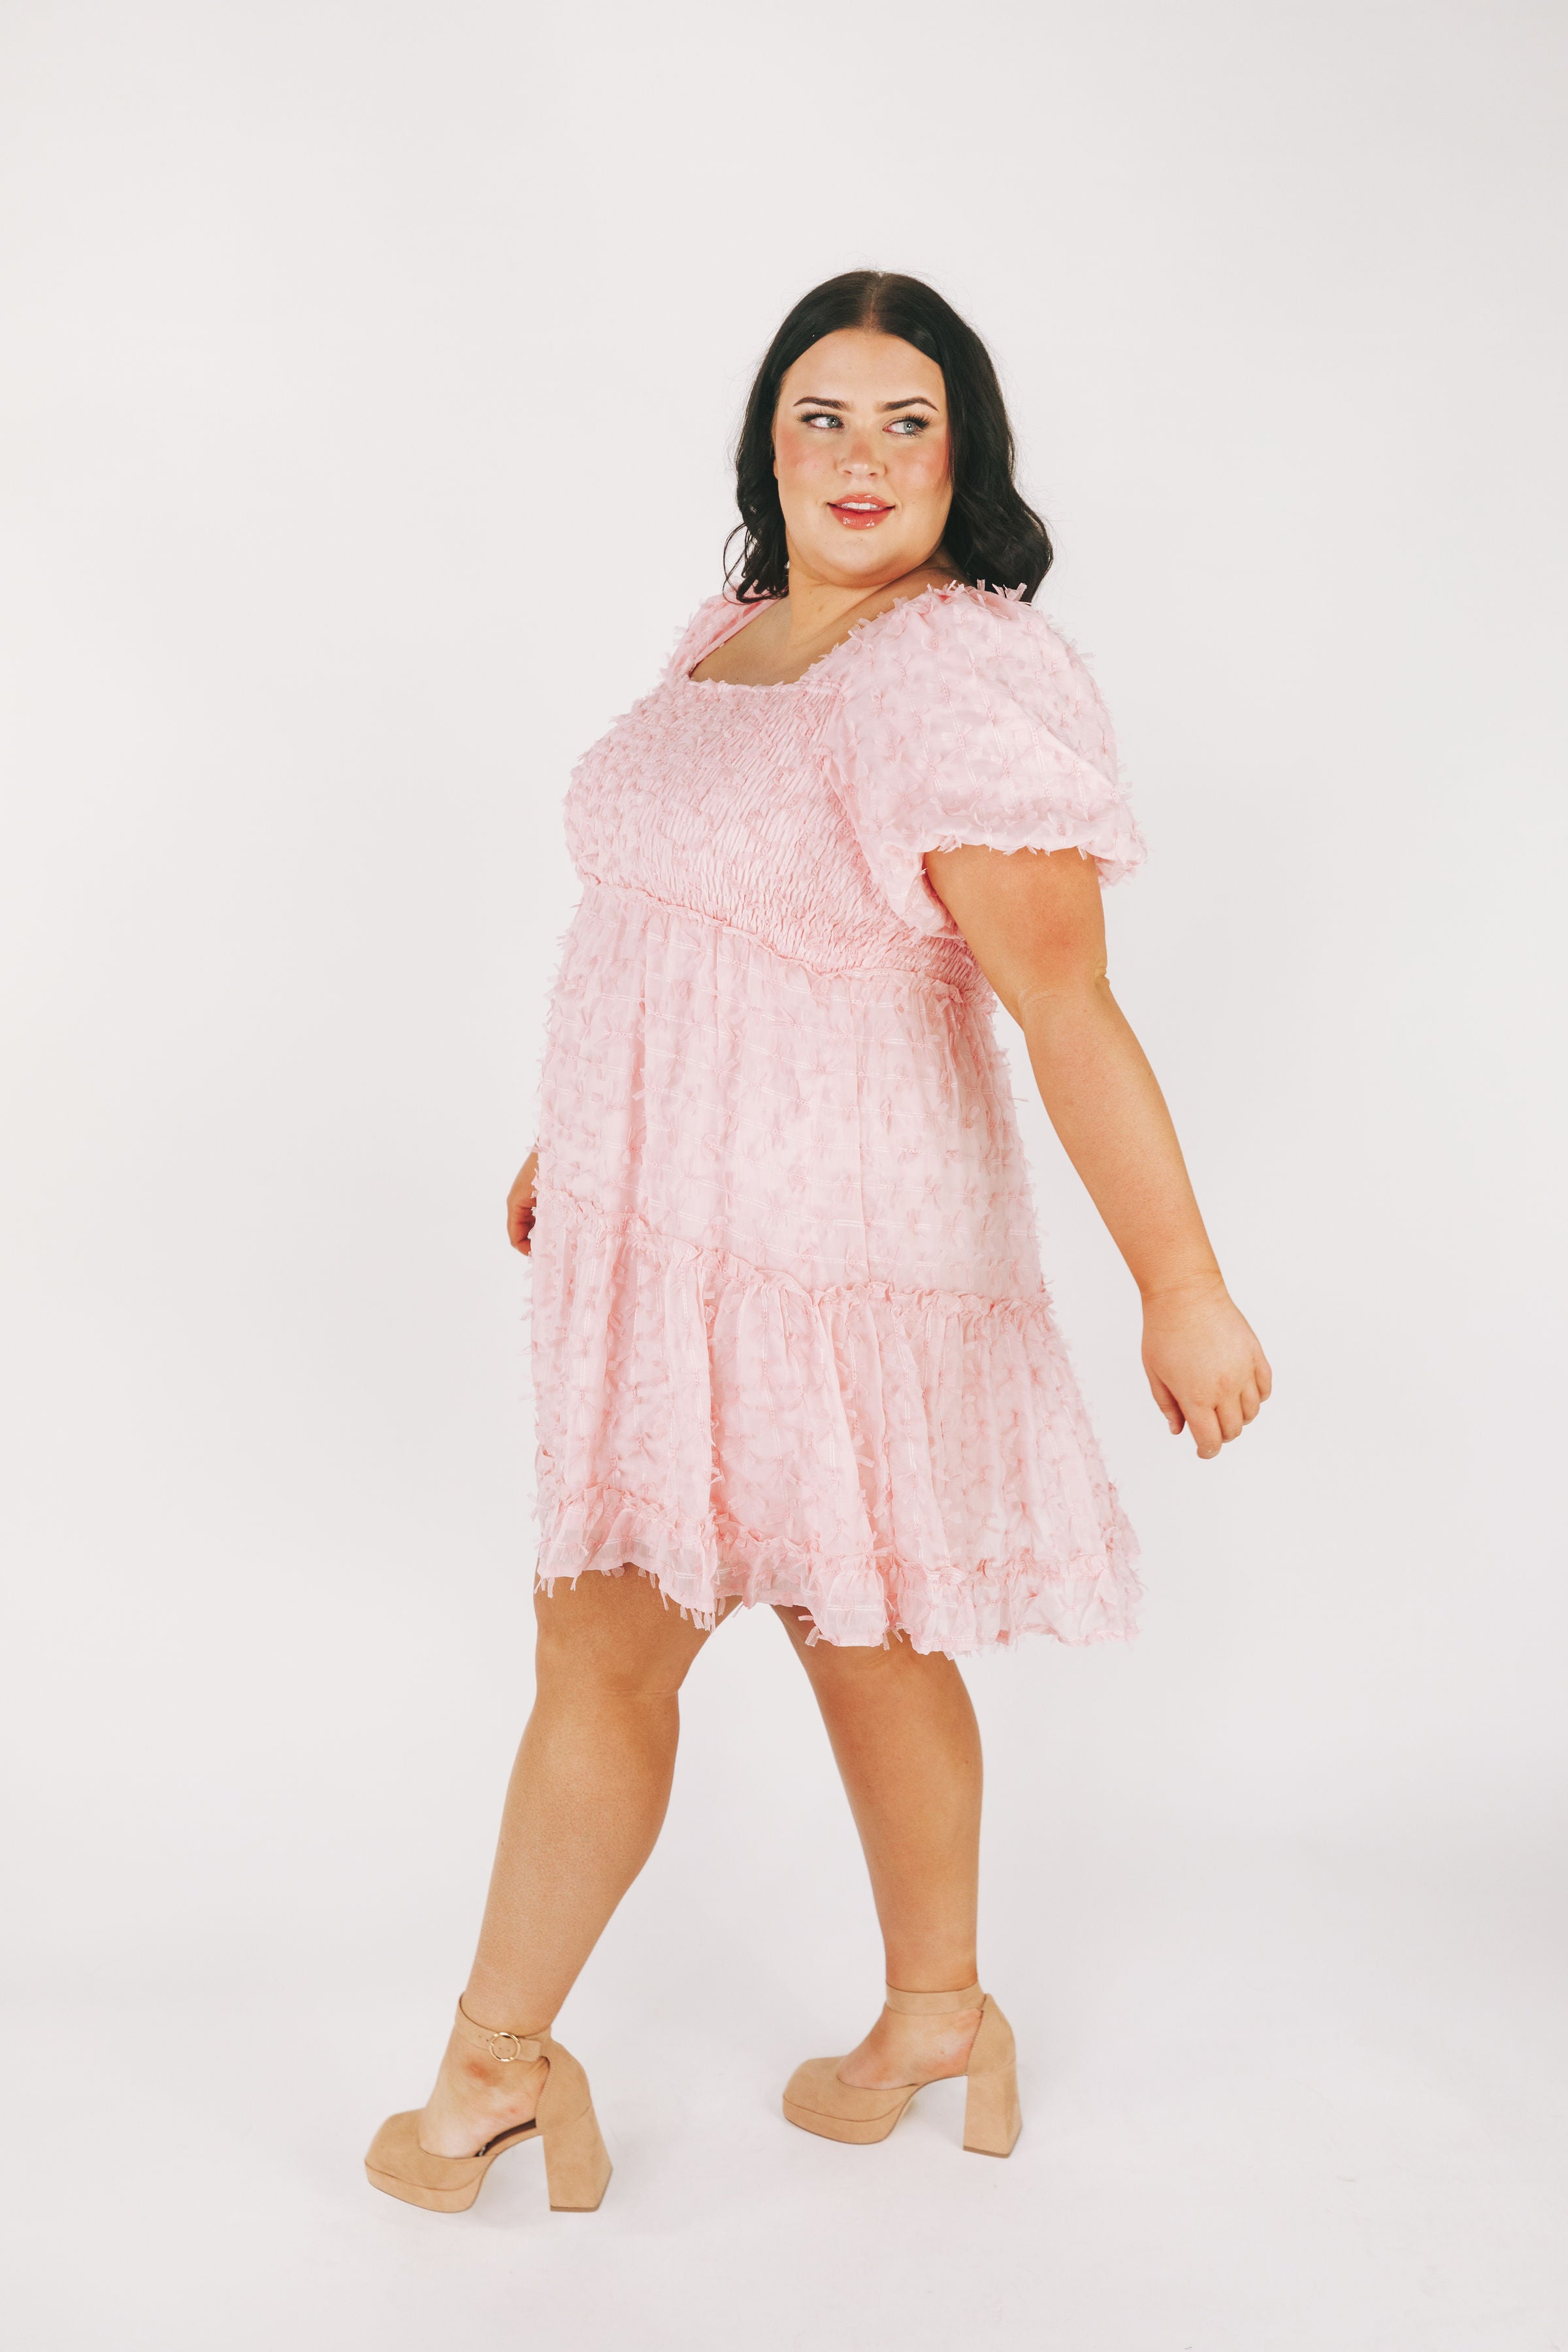 PLUS SIZE - Next Thing You Know Dress